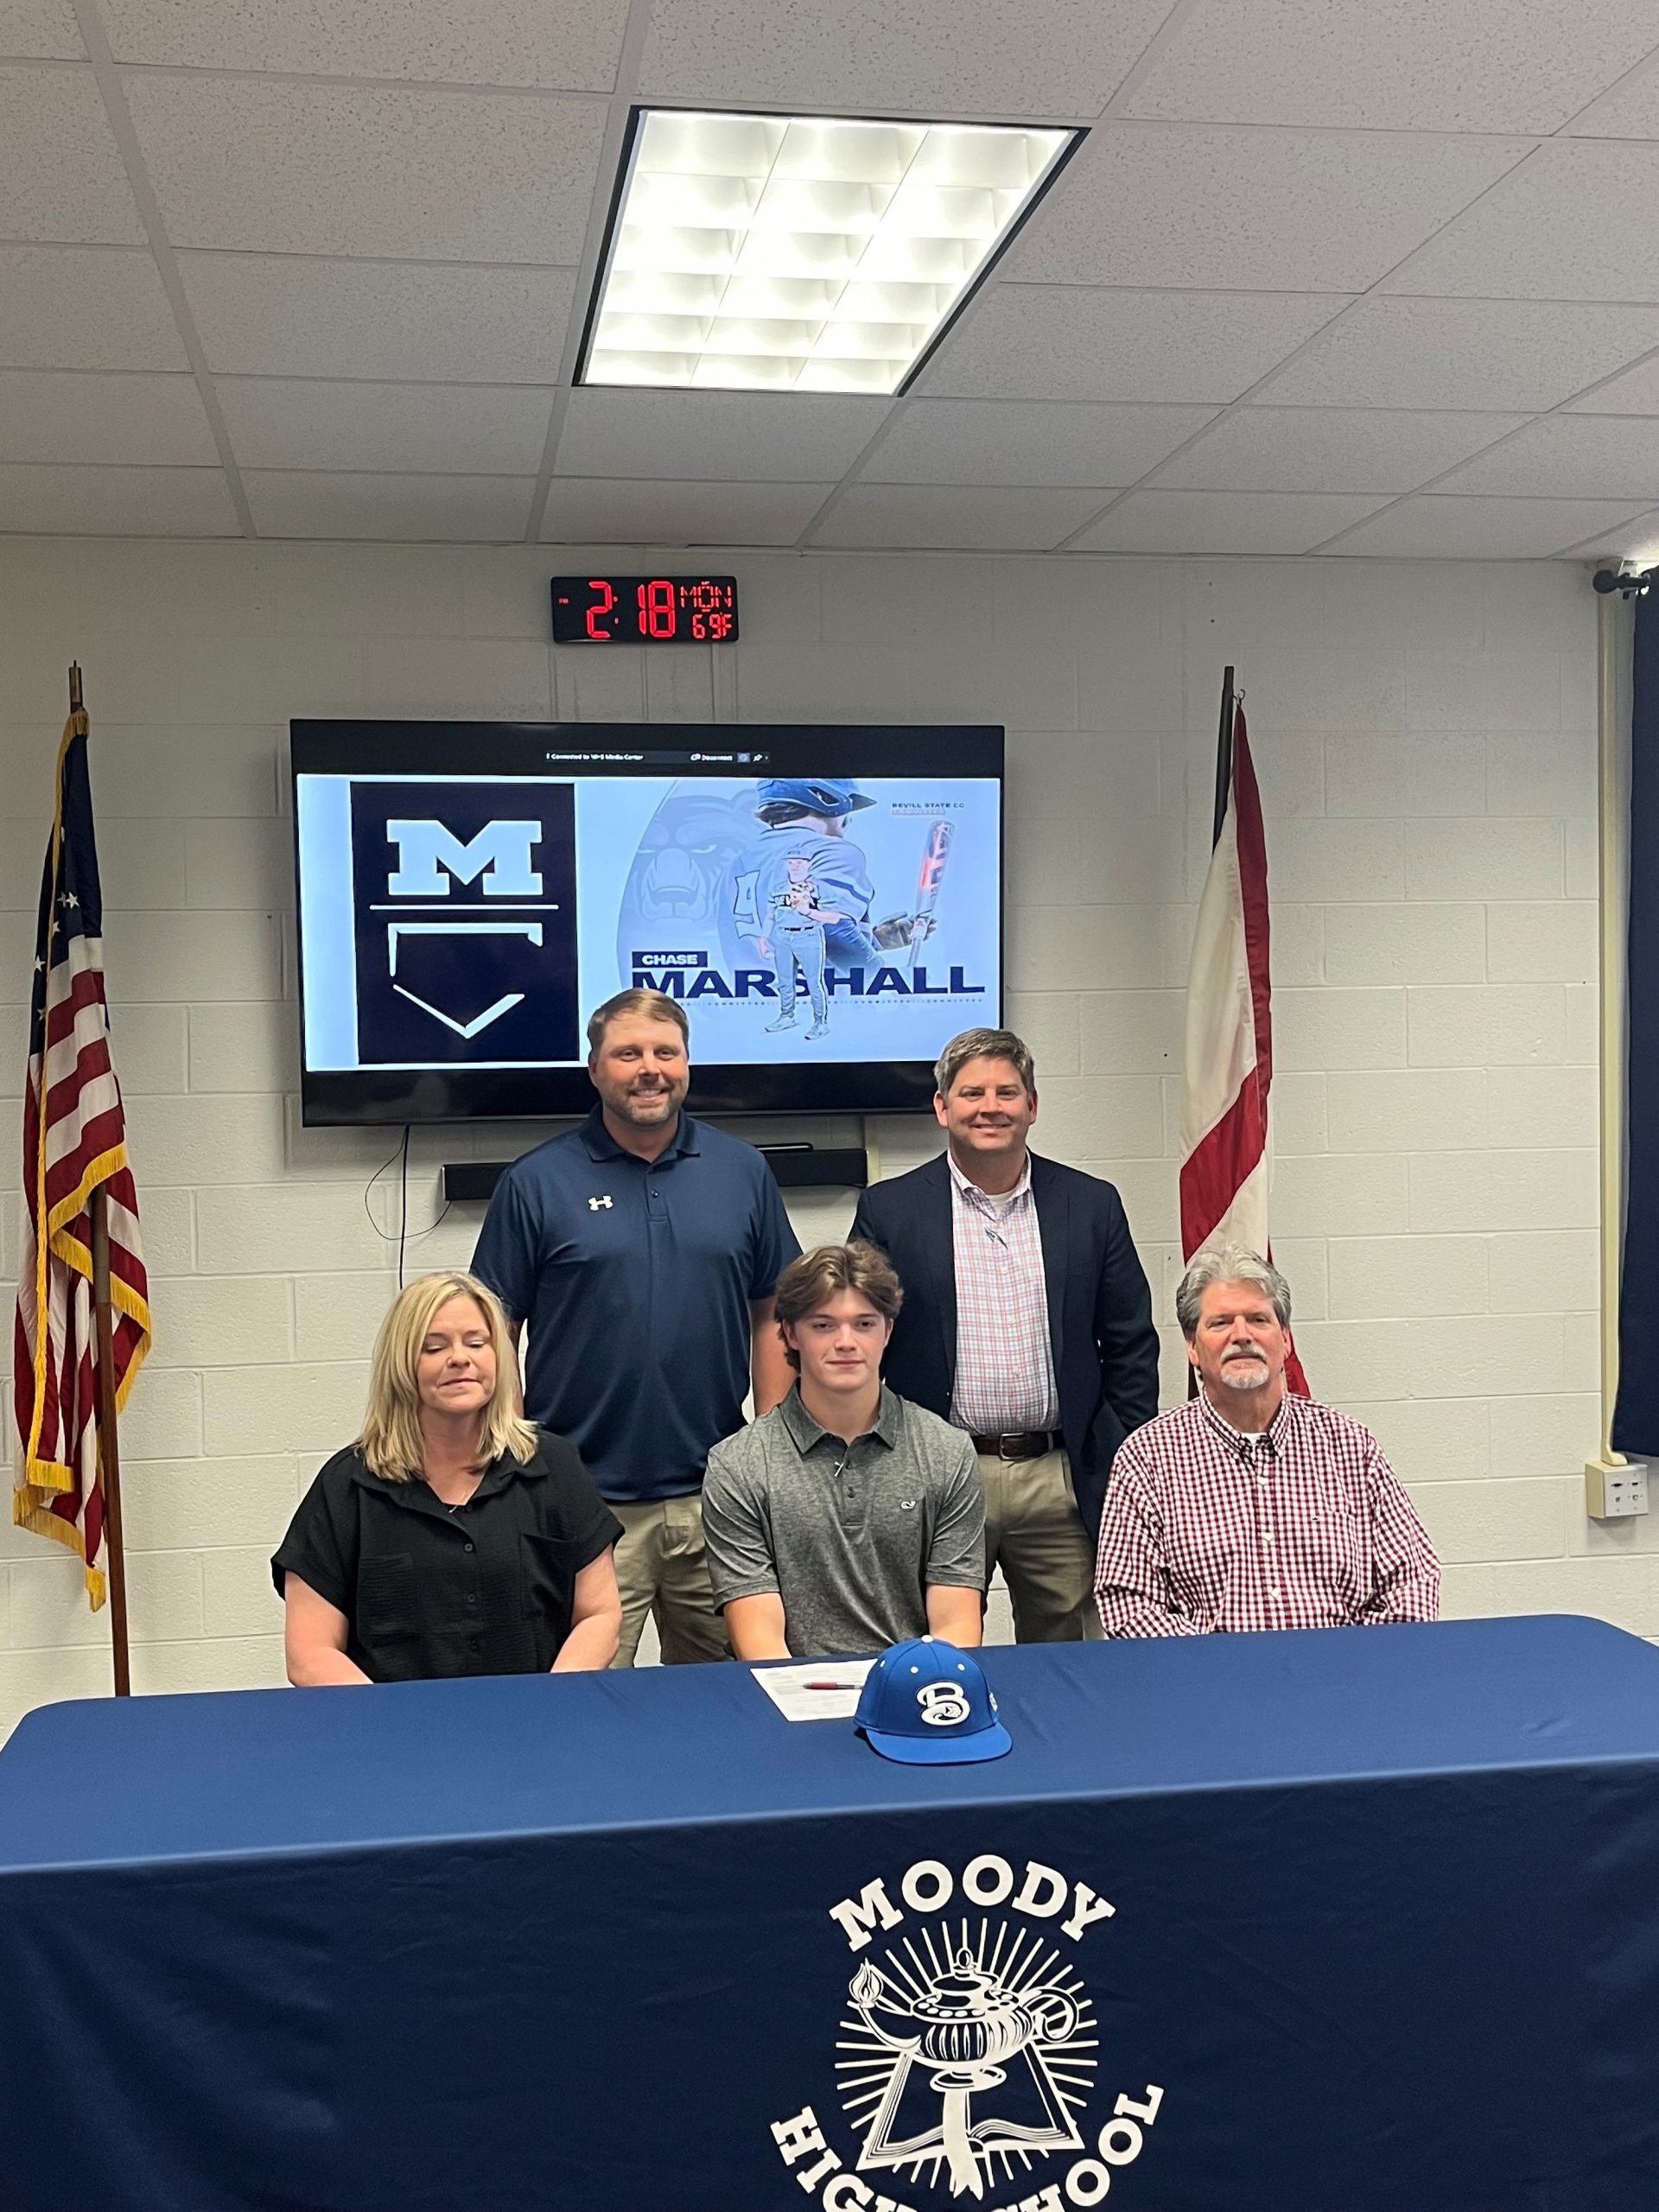 Moody’s Chase Marshall signs to play with Bevill